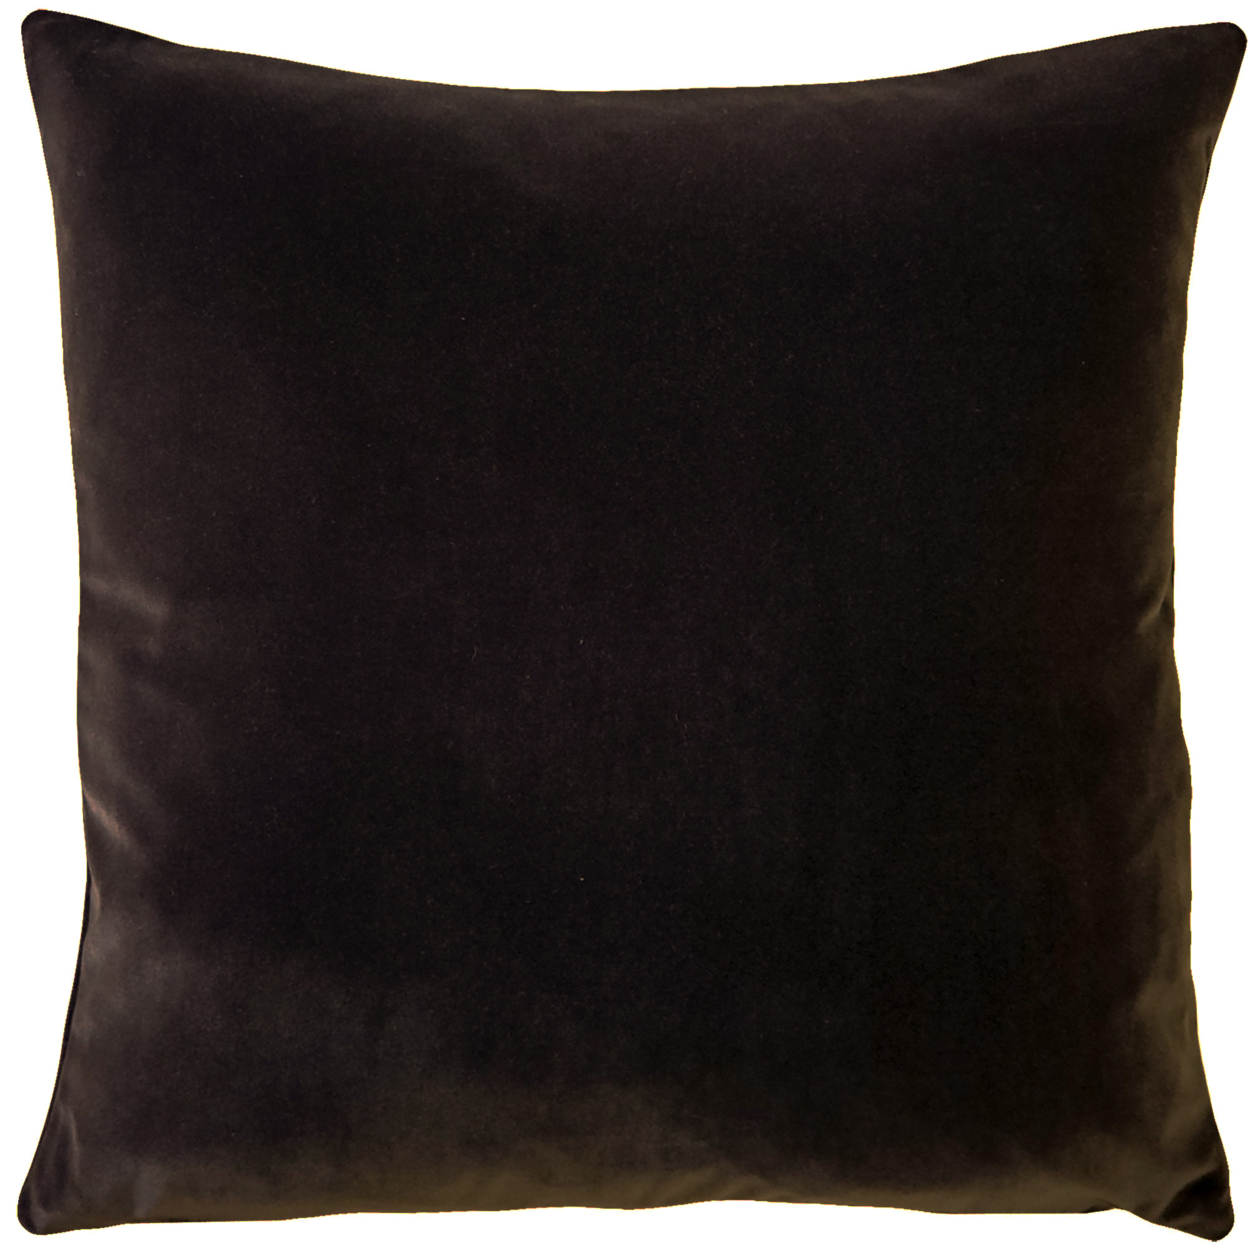 Castello Velvet Throw Pillows, Complete Pillow With Polyfill Pillow Insert (18 Colors, 3 Sizes) - Espresso Brown, 17x17